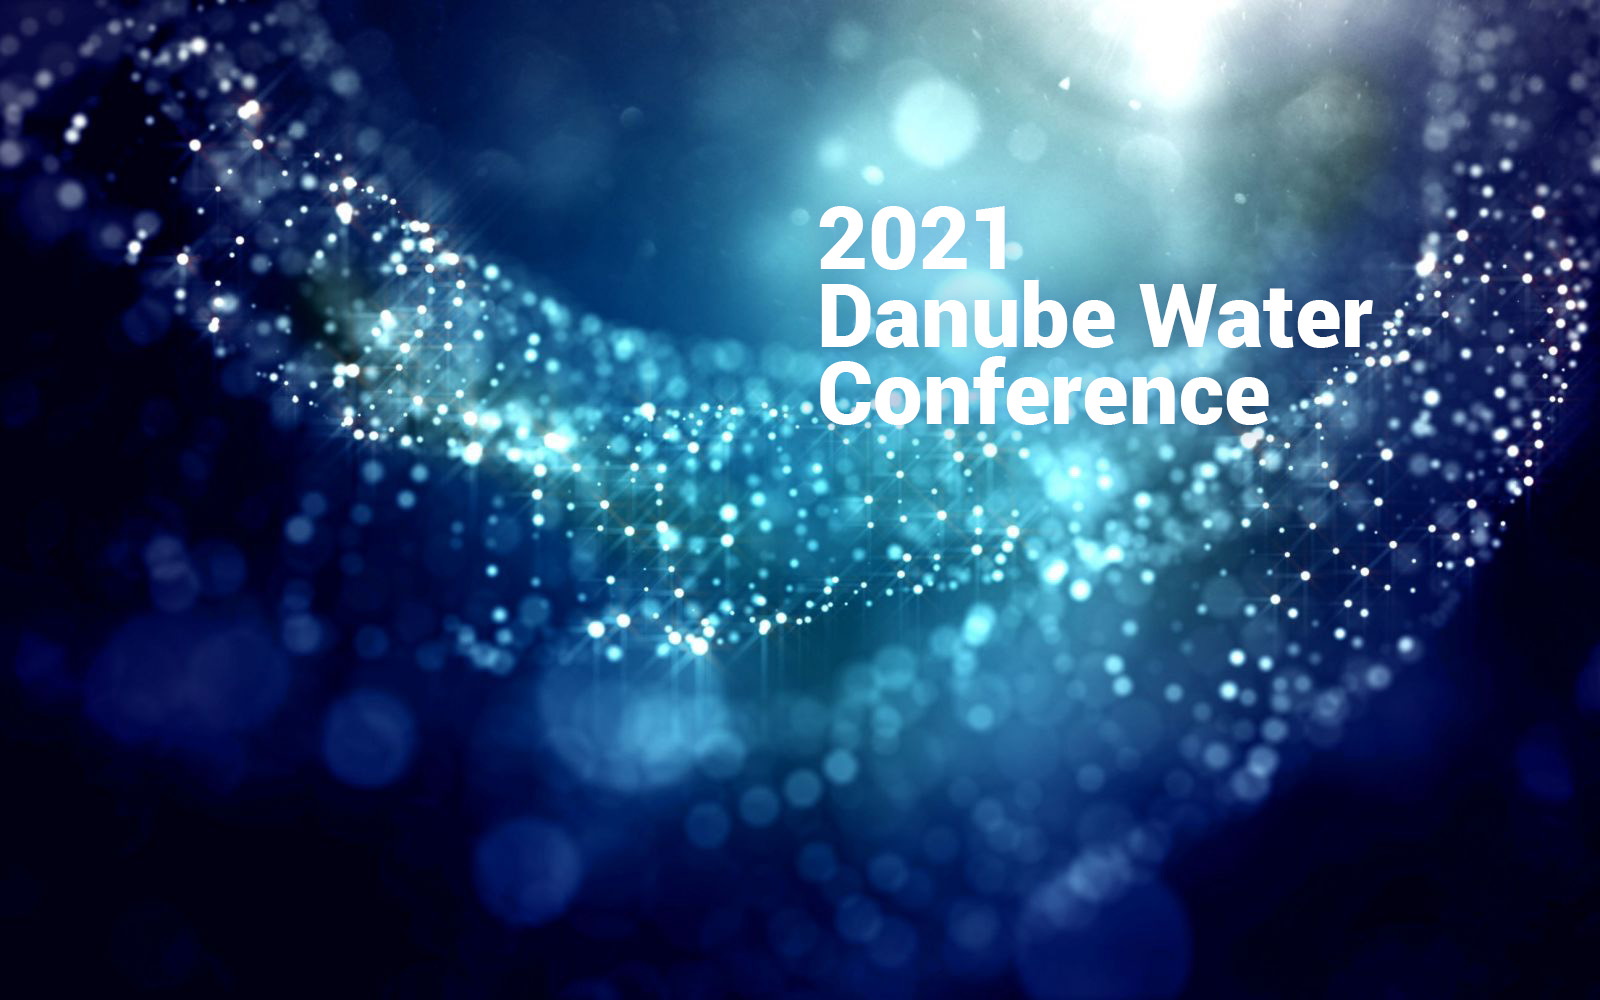 2021 Danube Water Conference: The Future in a Nutshell 